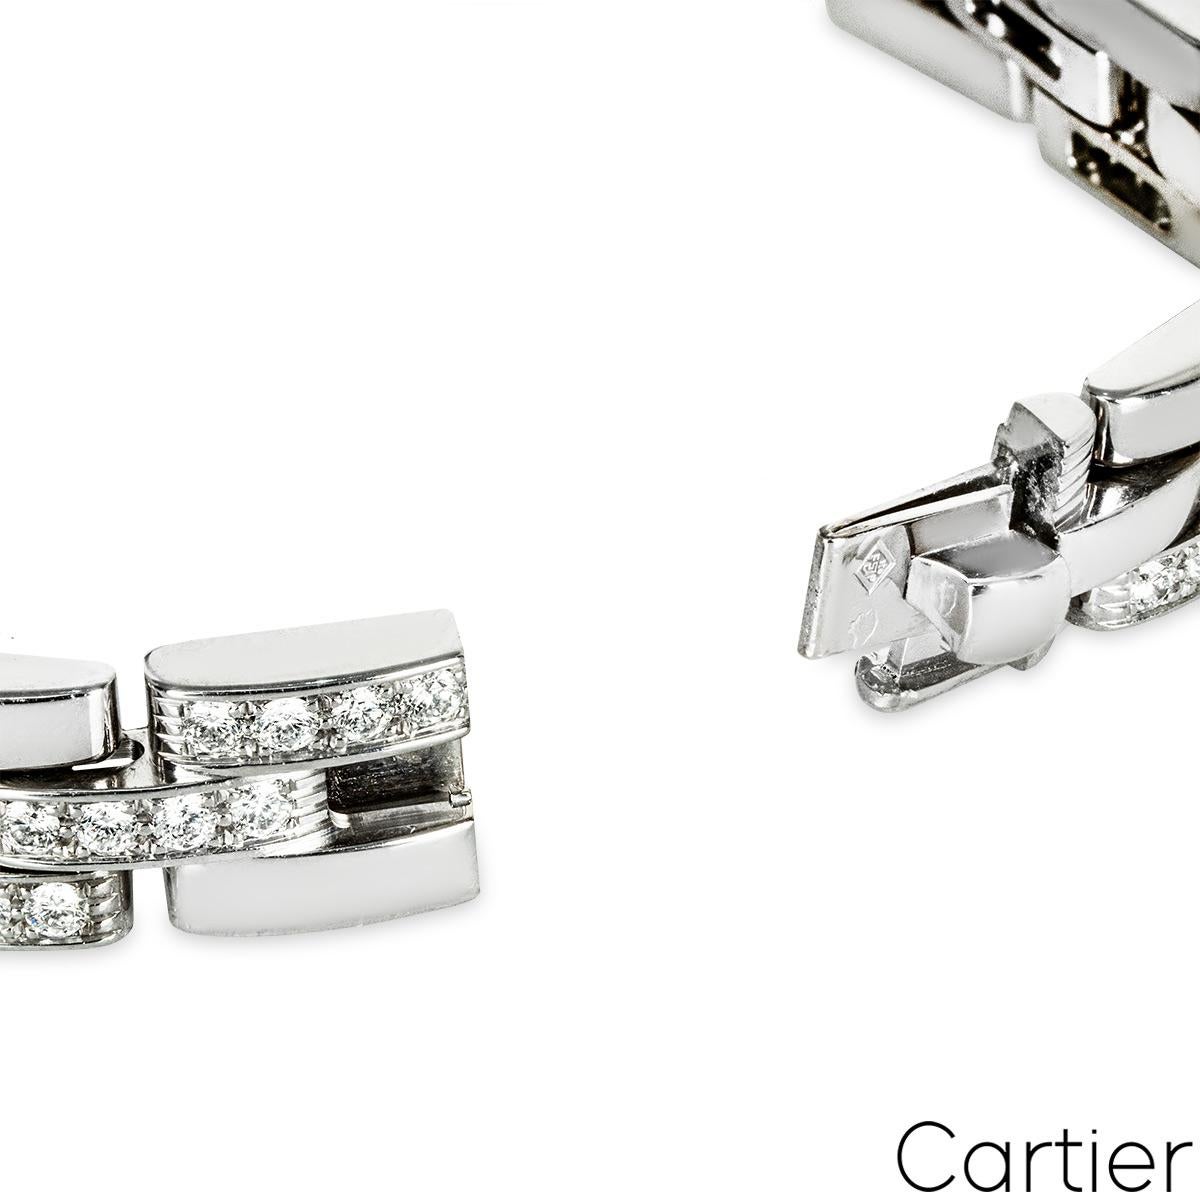 Cartier White Gold Diamond Maillon Panthere Bracelet N6025200 In Excellent Condition For Sale In London, GB